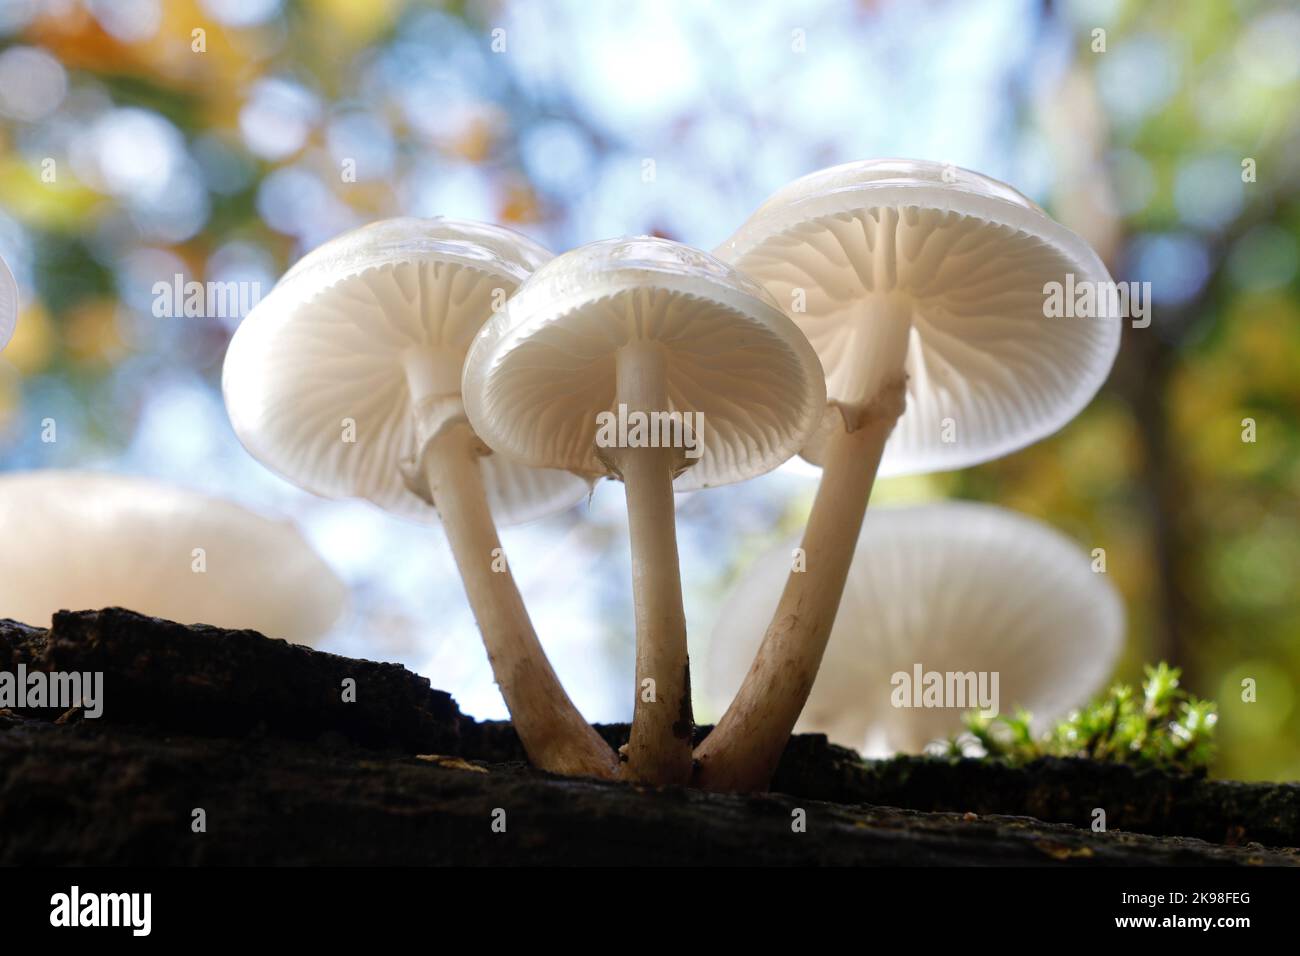 The Porcelain Fungus, Oudemansiella mucidaa, showing the wonderful translucent properties that give this wild mushroom its common English name Stock Photo